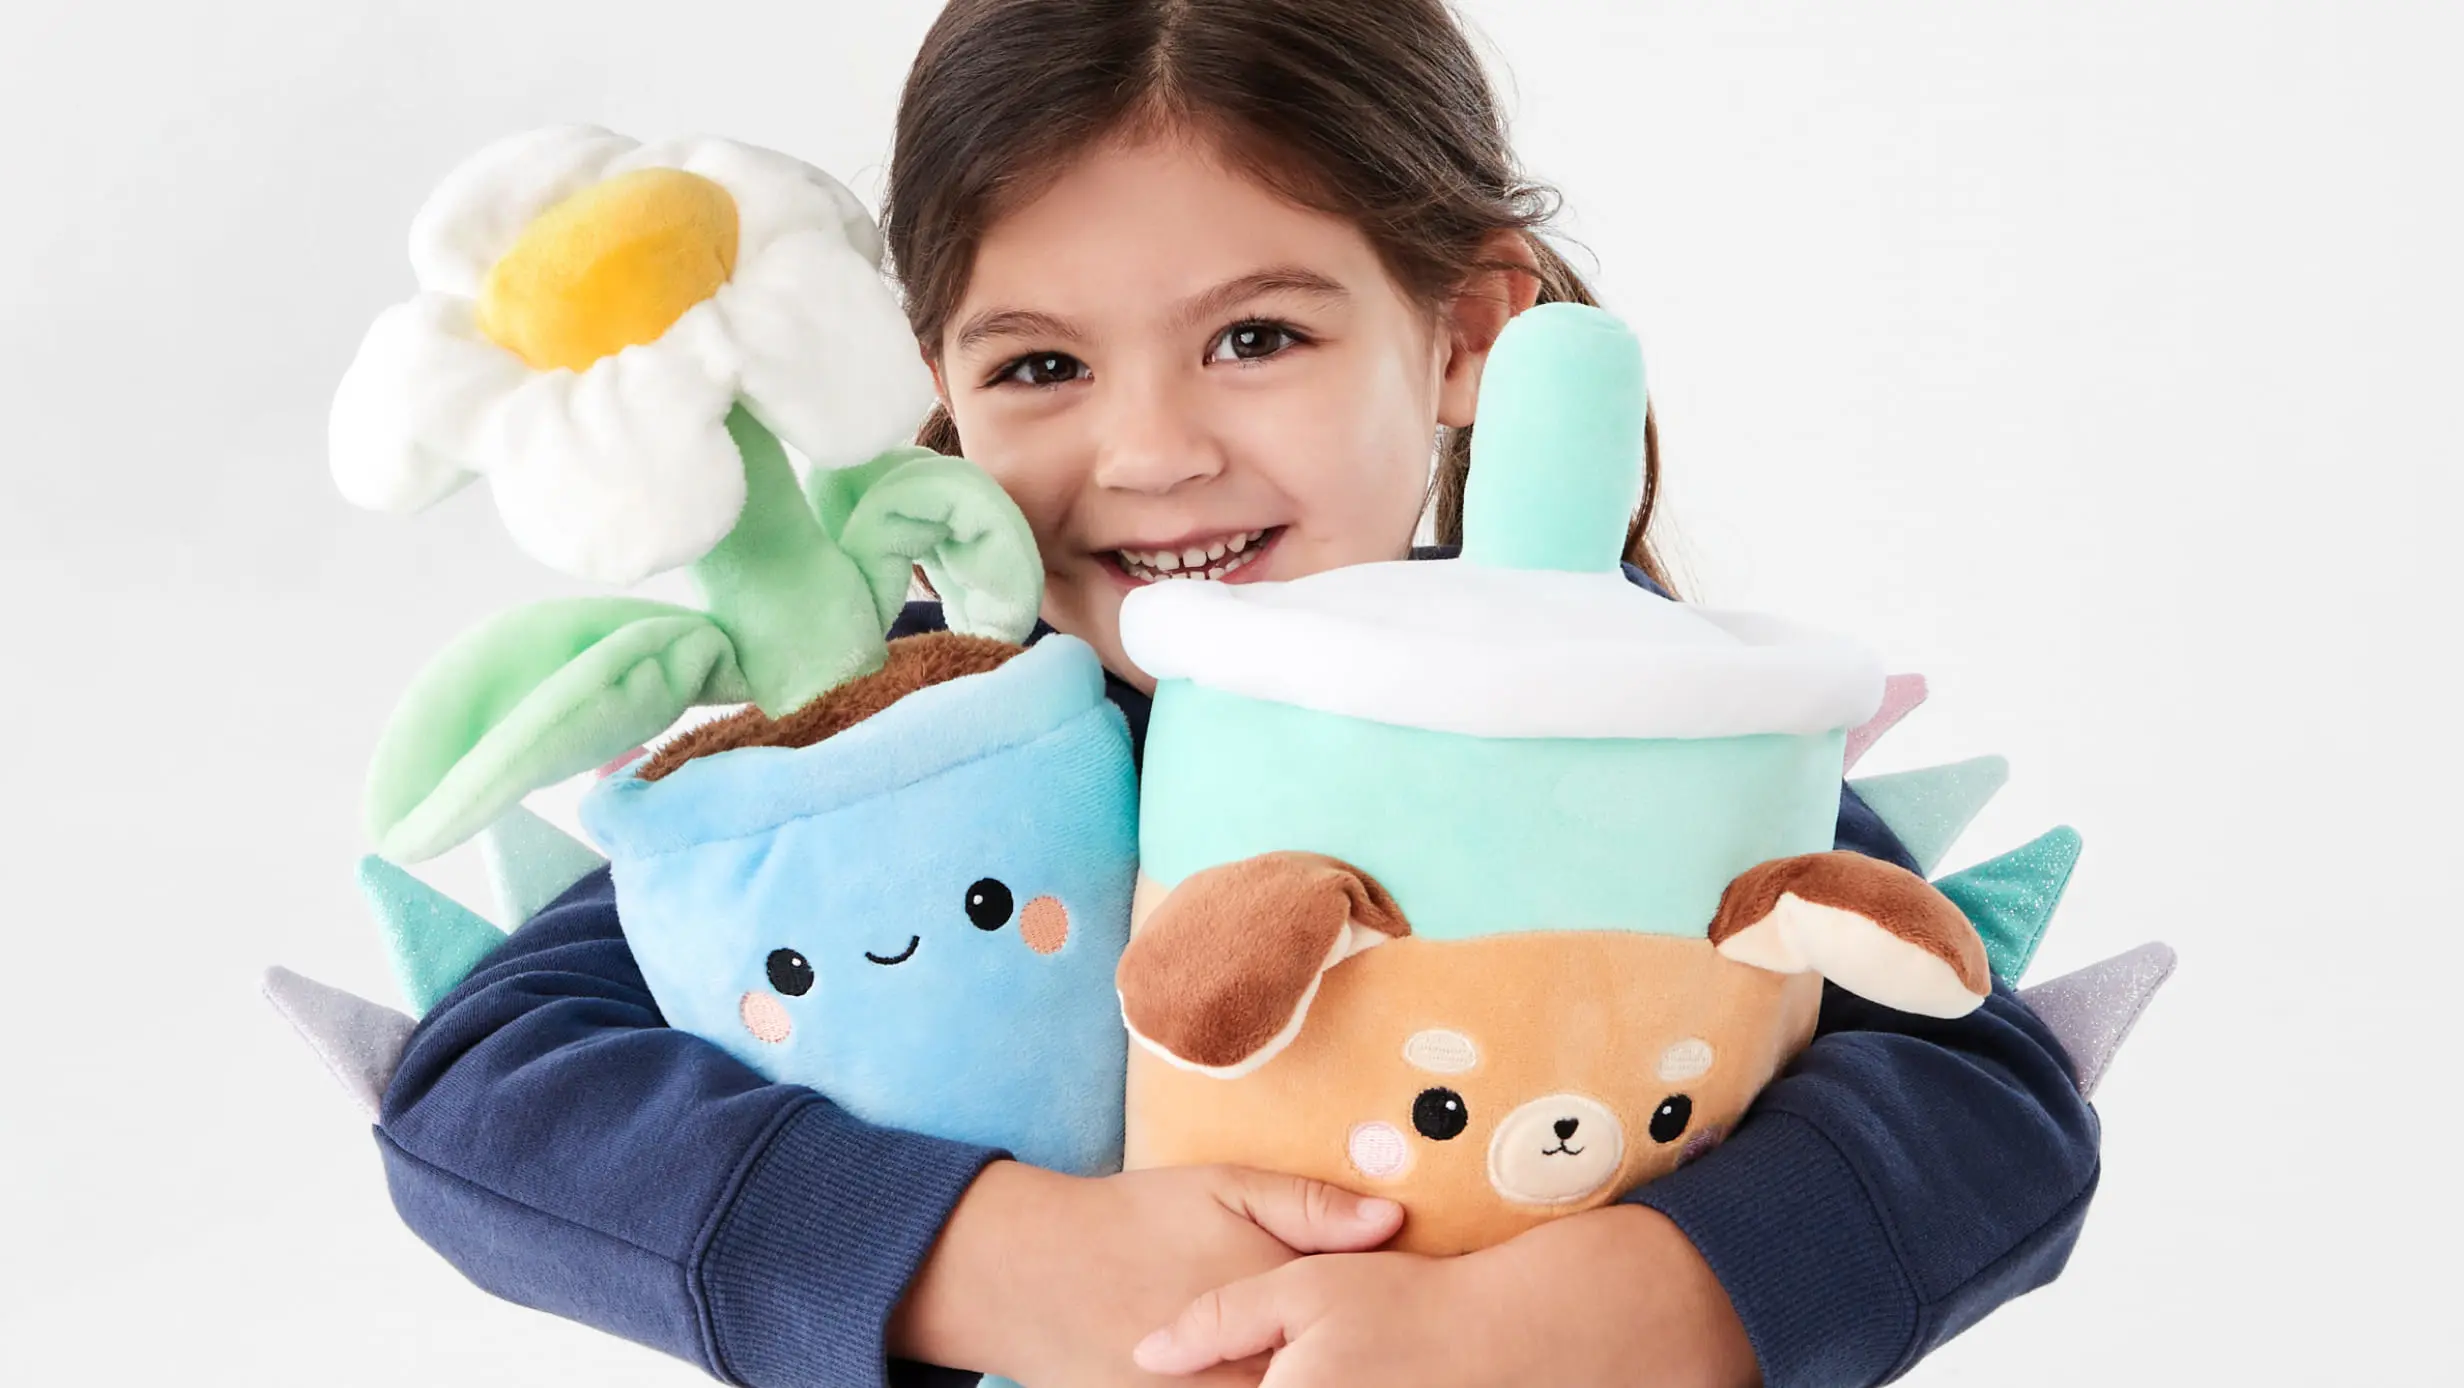 young girl holding an assortment of plush toys